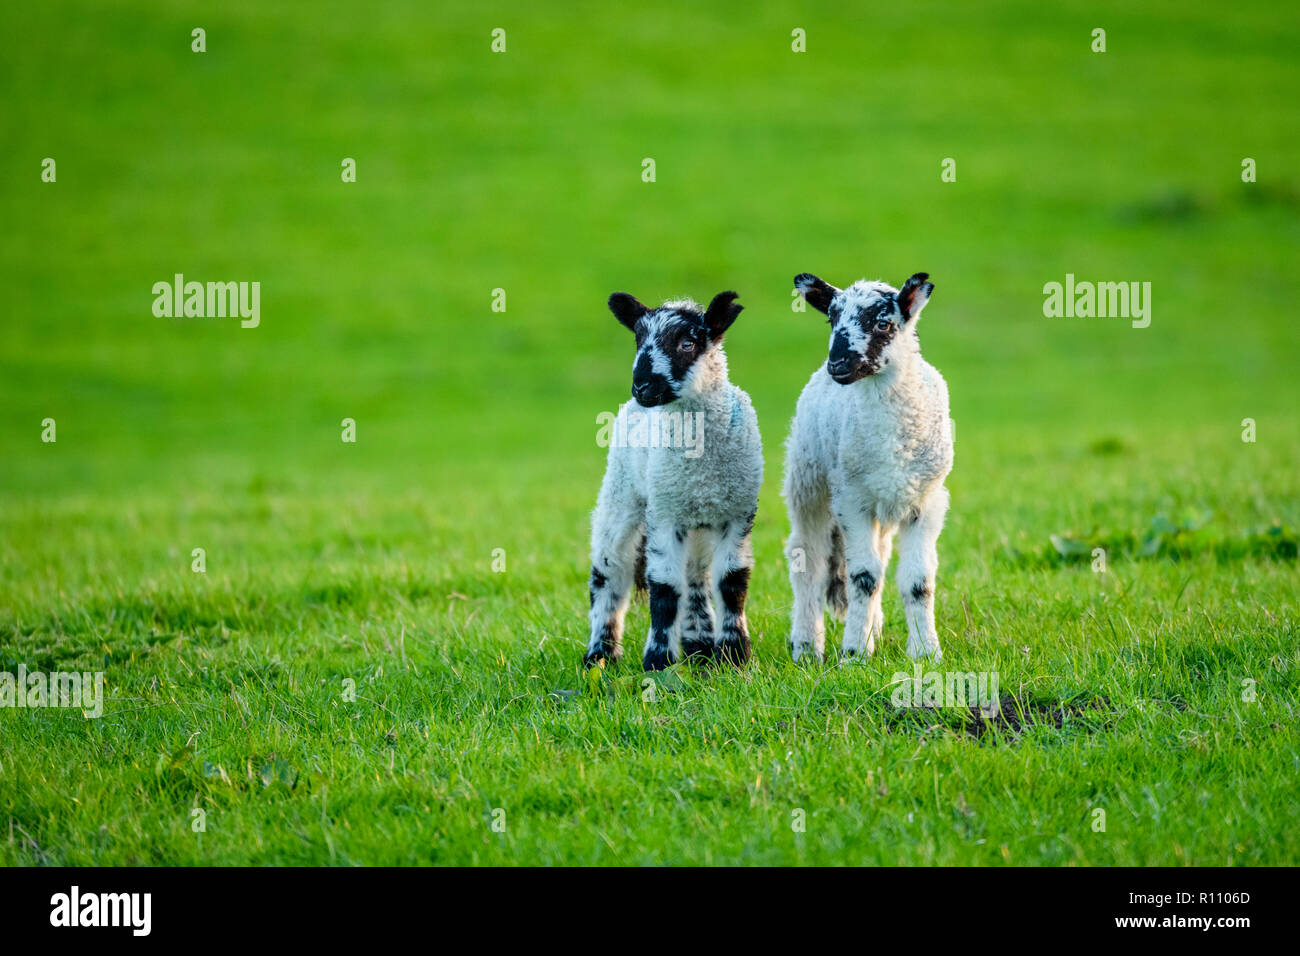 2 small cute lambs with ears up, standing side by side together, looking in same direction, in farm field in springtime. Yorkshire, England, GB, UK. Stock Photo